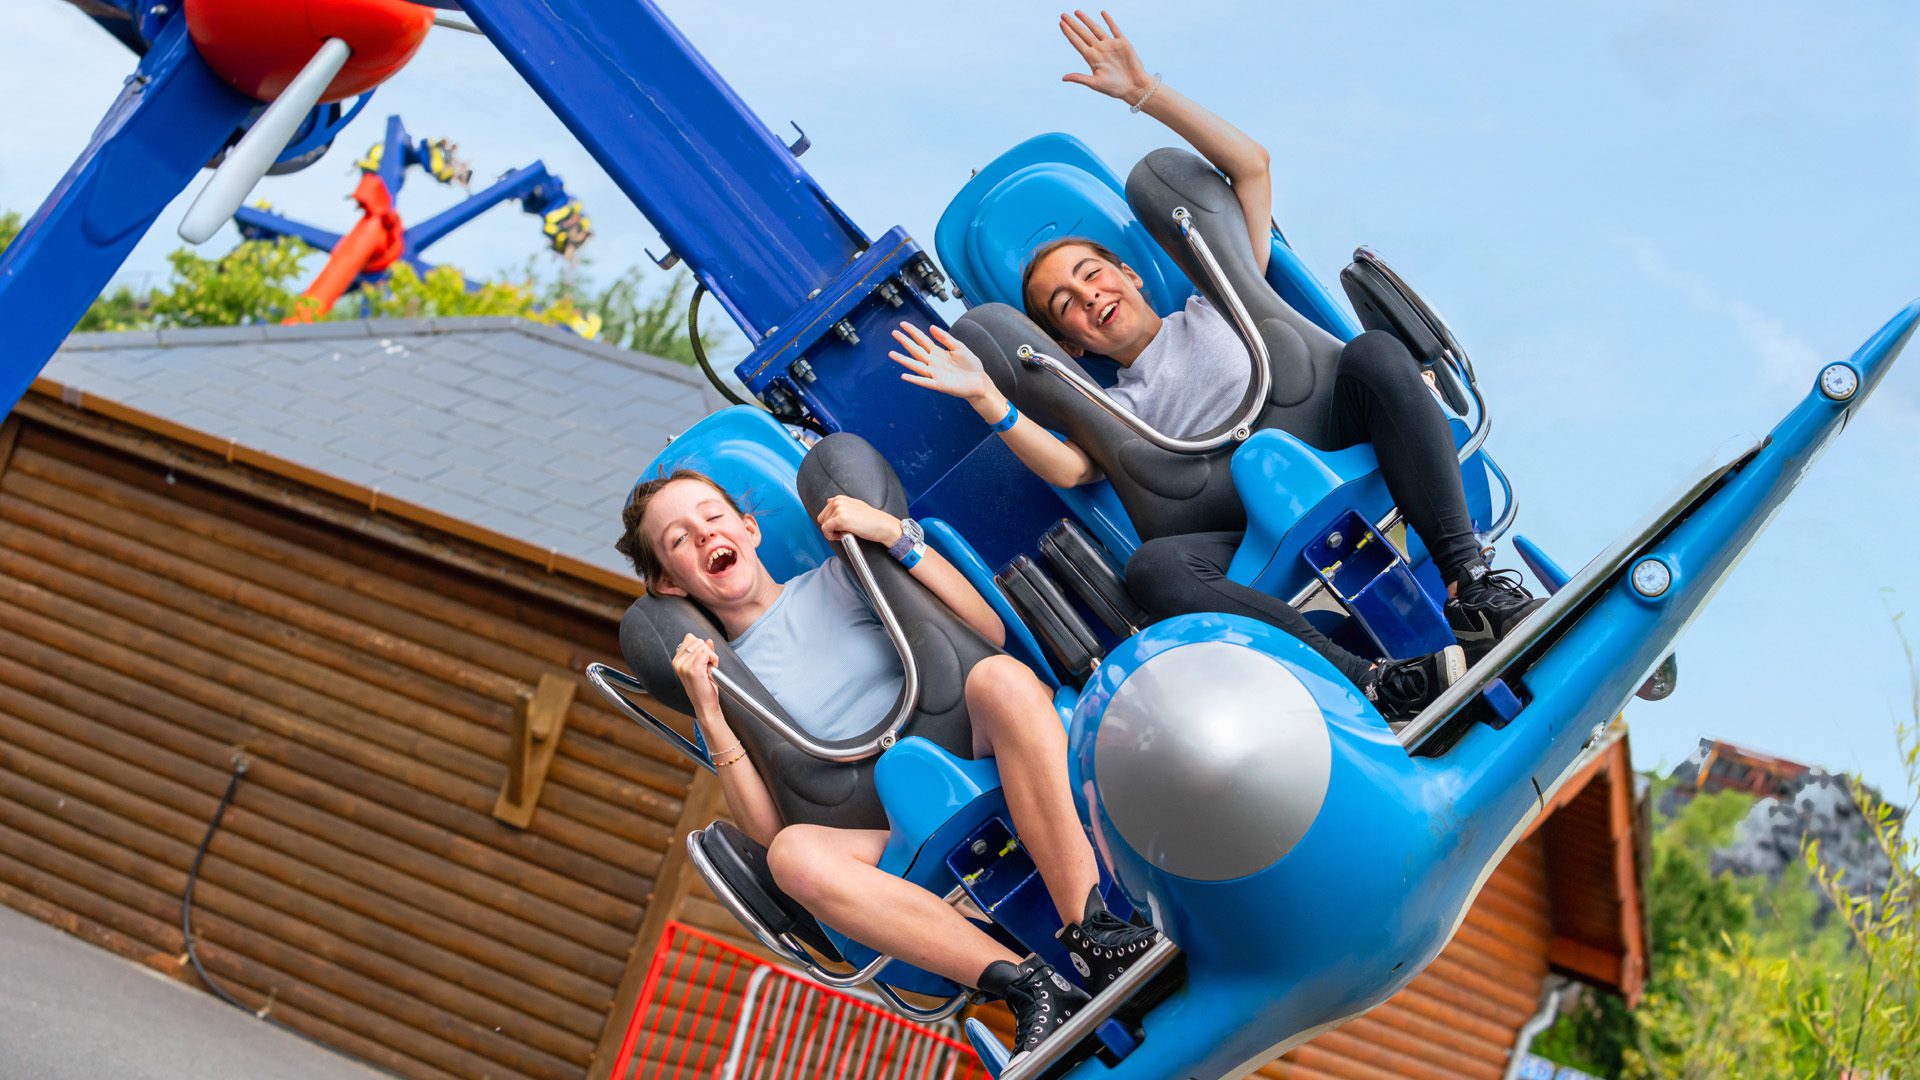 close up of two children on air race ride in emerald park